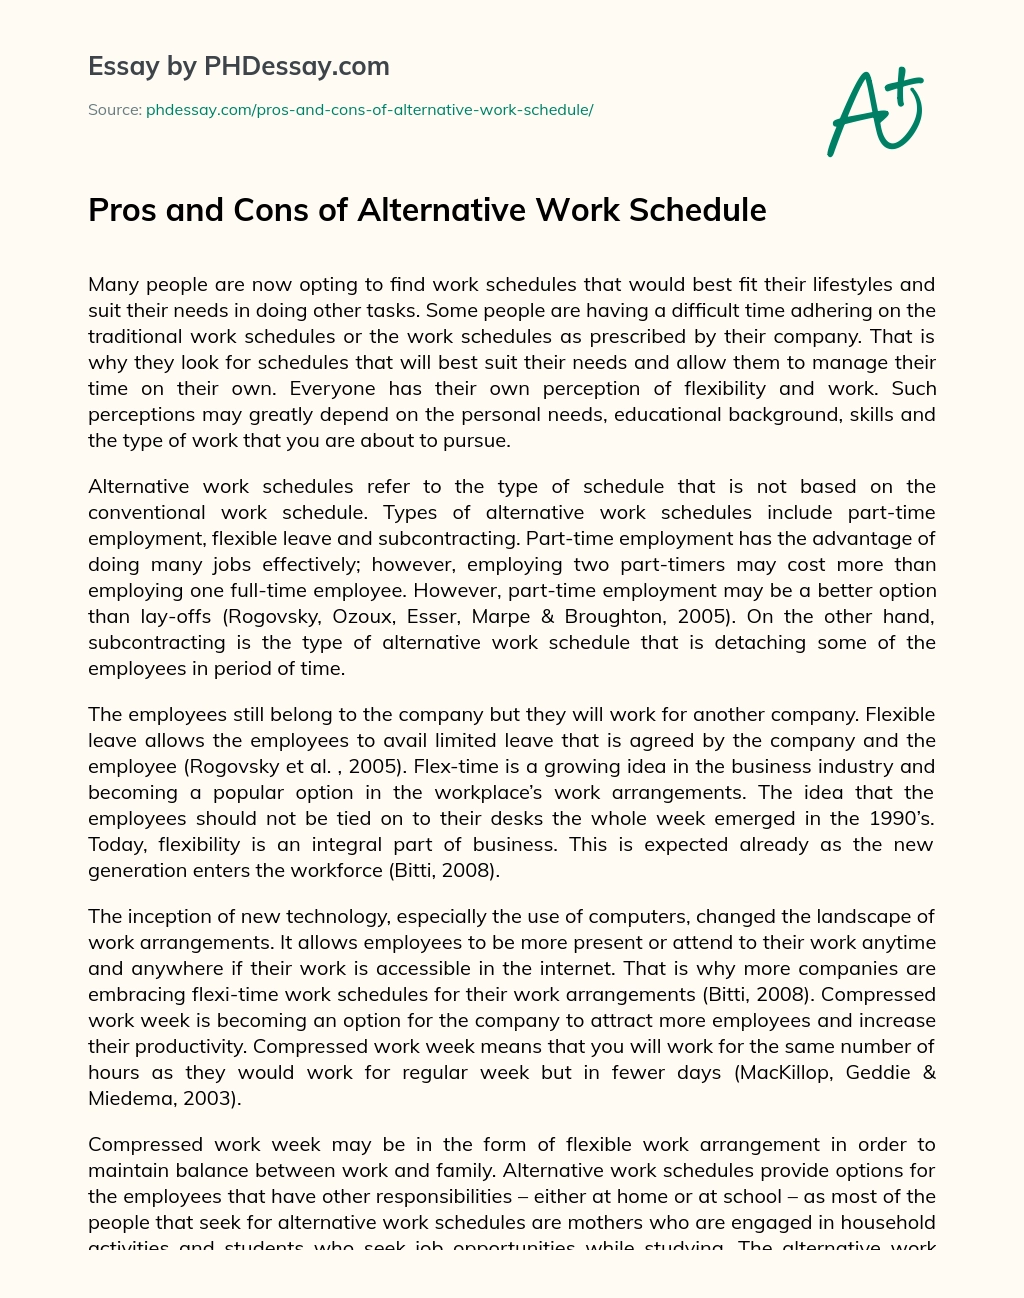 Pros and Cons of Alternative Work Schedule essay